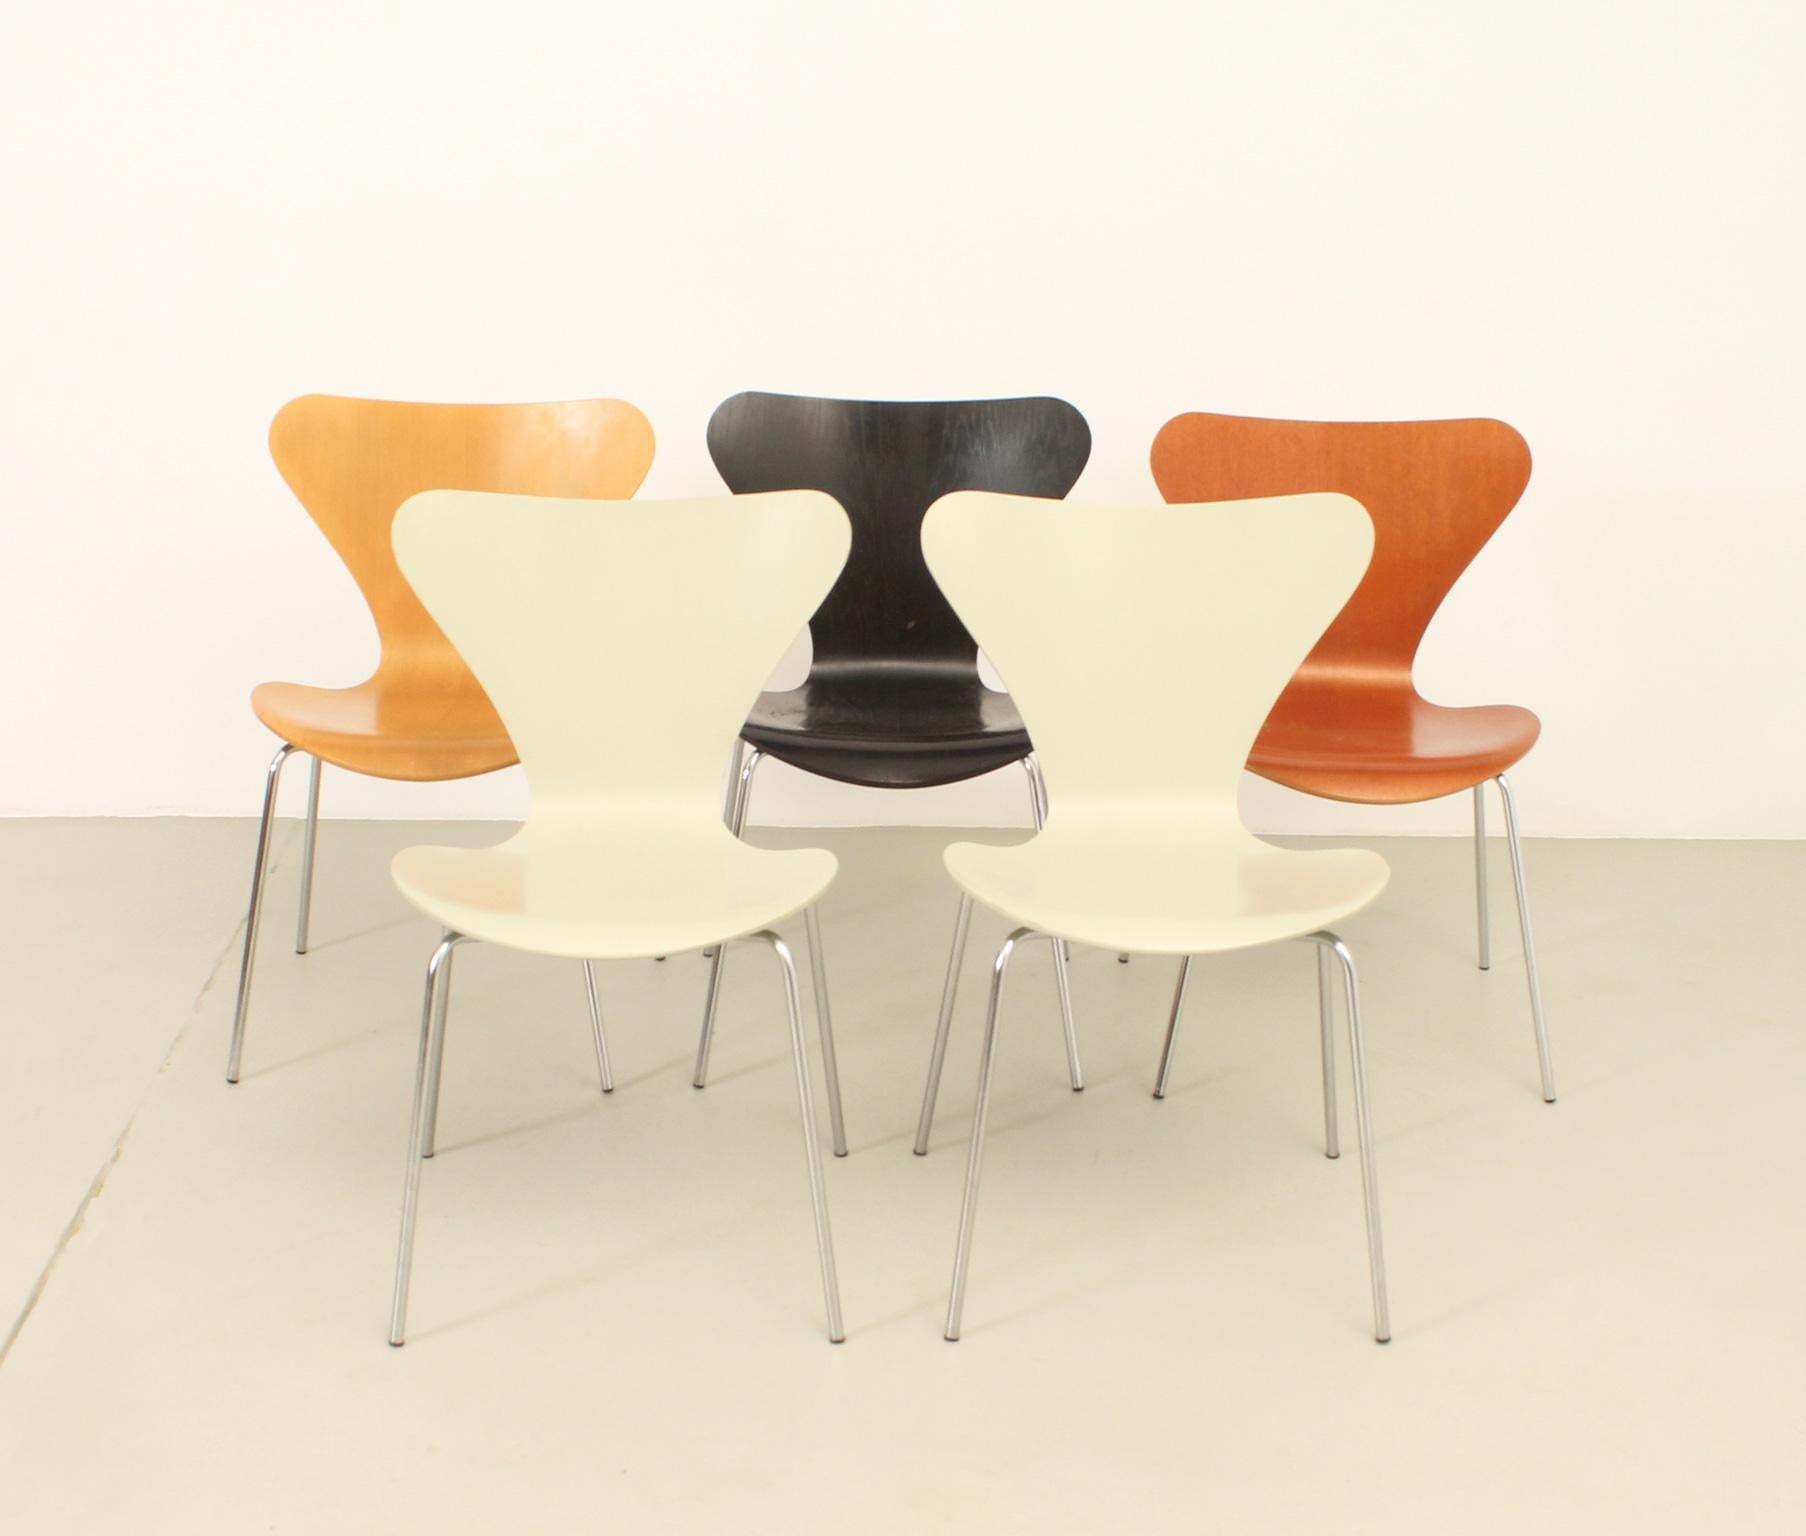 Set of five 3107 chairs designed in 1955 by danish architect Arne Jacobsen for Fritz Hansen. Different editions in grey and black lacquered wood and natural and stained beech wood. Editions from 1970, 1986, 1990 and 1991.